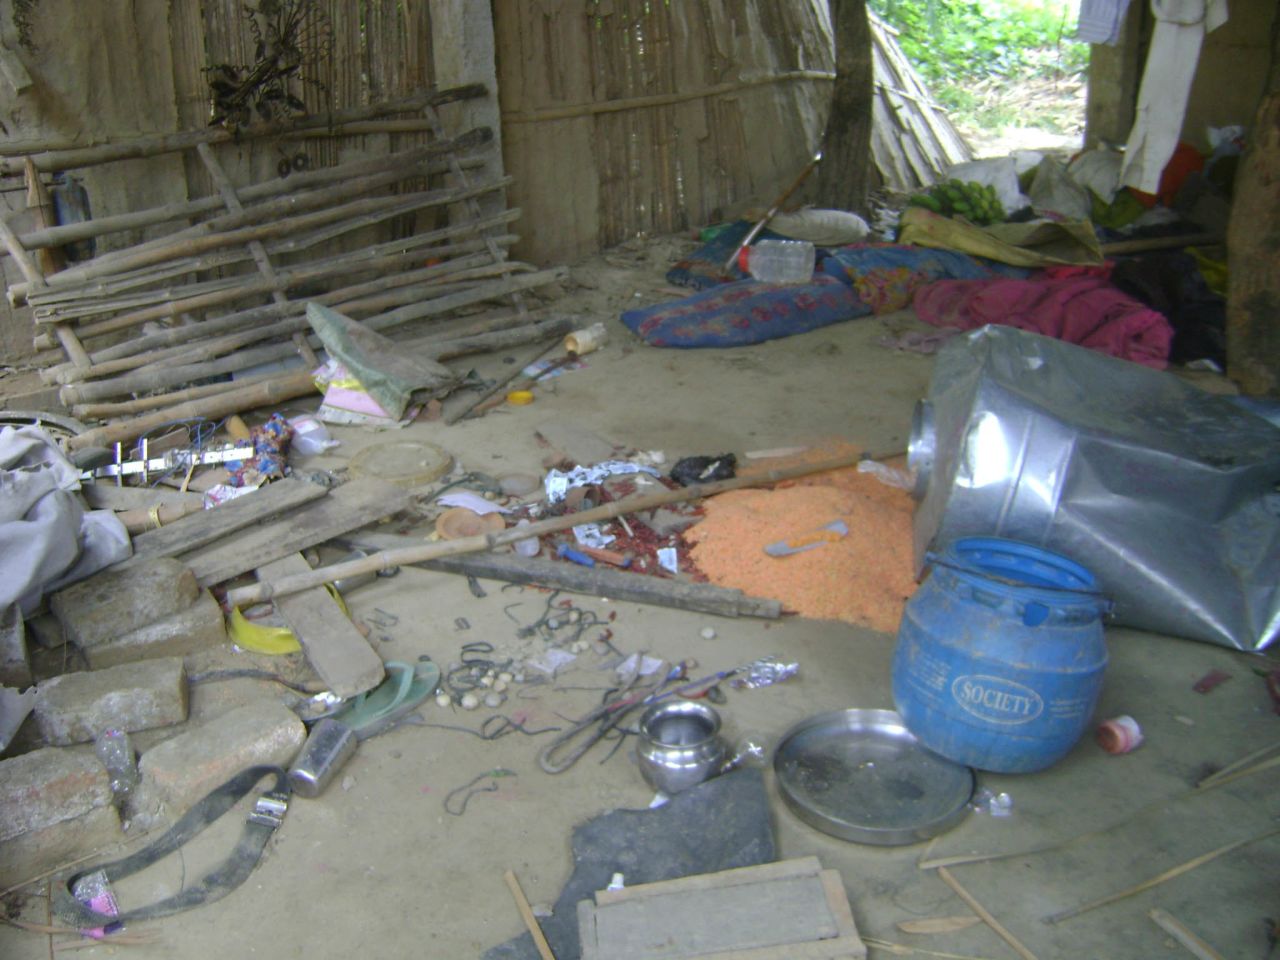 Angry villagers ransacked Harijan's house after reports of his involvement emerged, police said. Kudiya village, in the Nawalparasi district bordering India, is home to some of the country's poorest and uneducated people -- often known as "untouchables" in the traditional caste system.